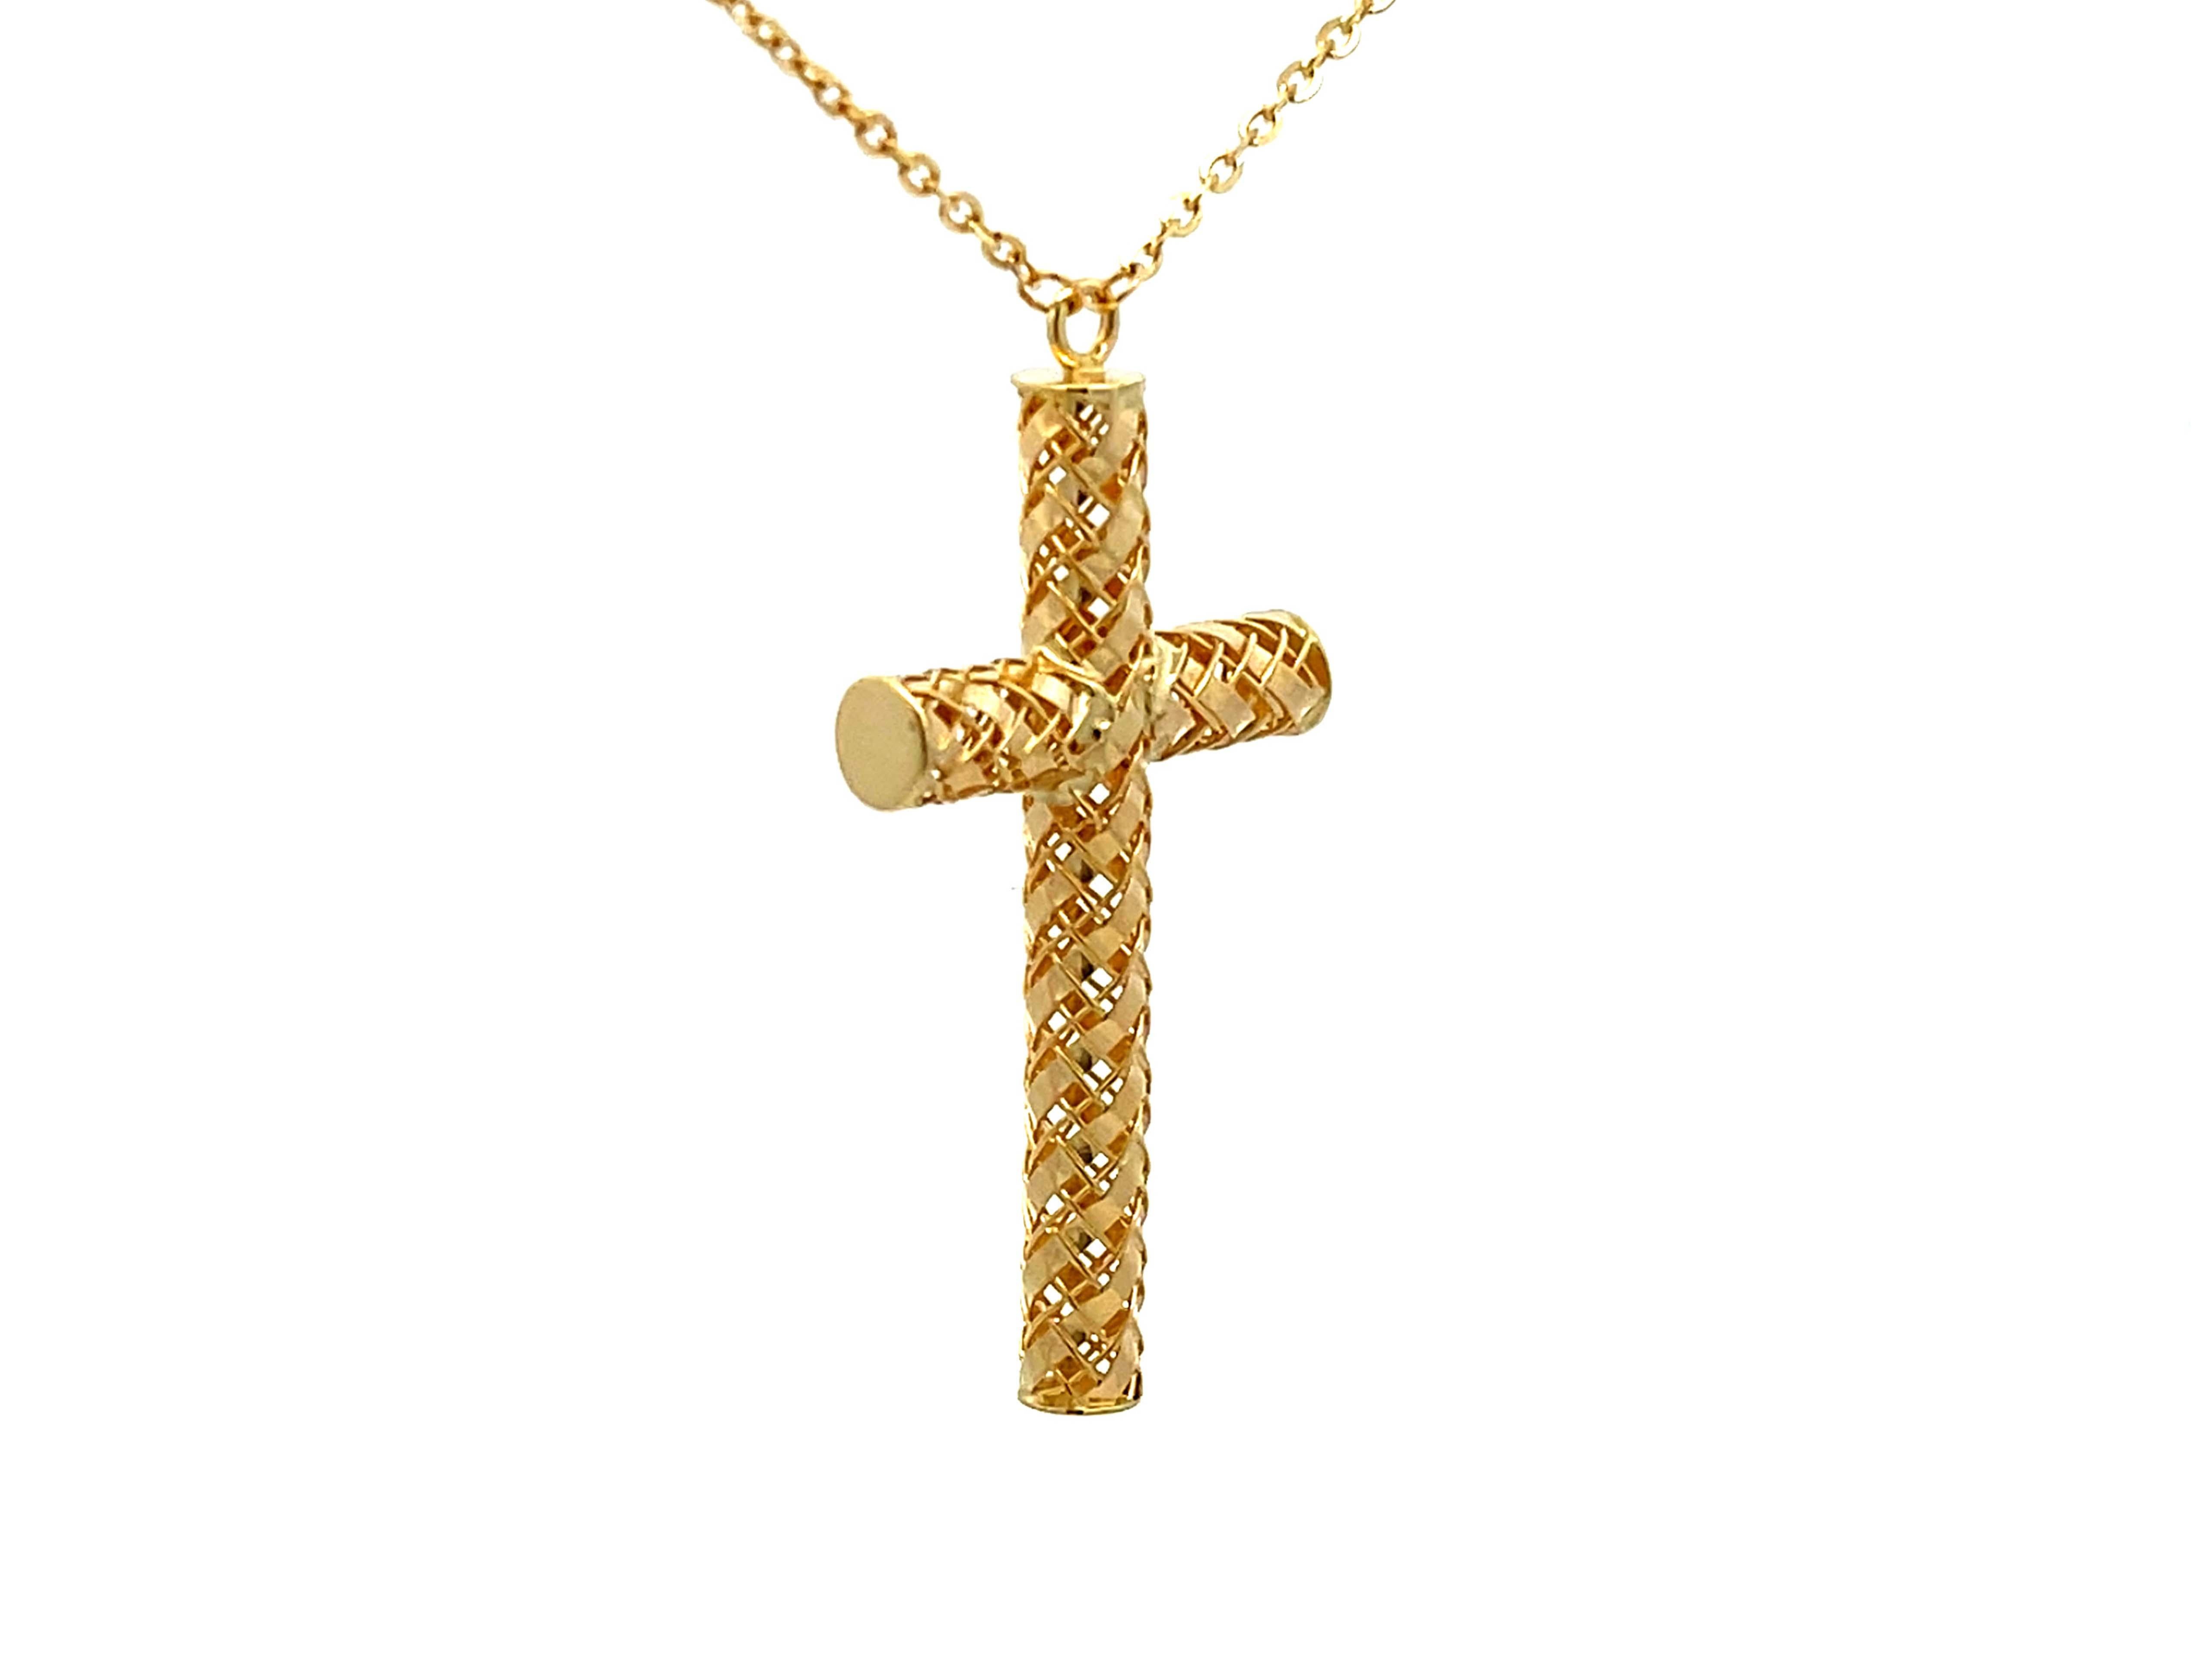 Modern Textured Gold Cross Necklace in 14Karat Yellow Gold For Sale